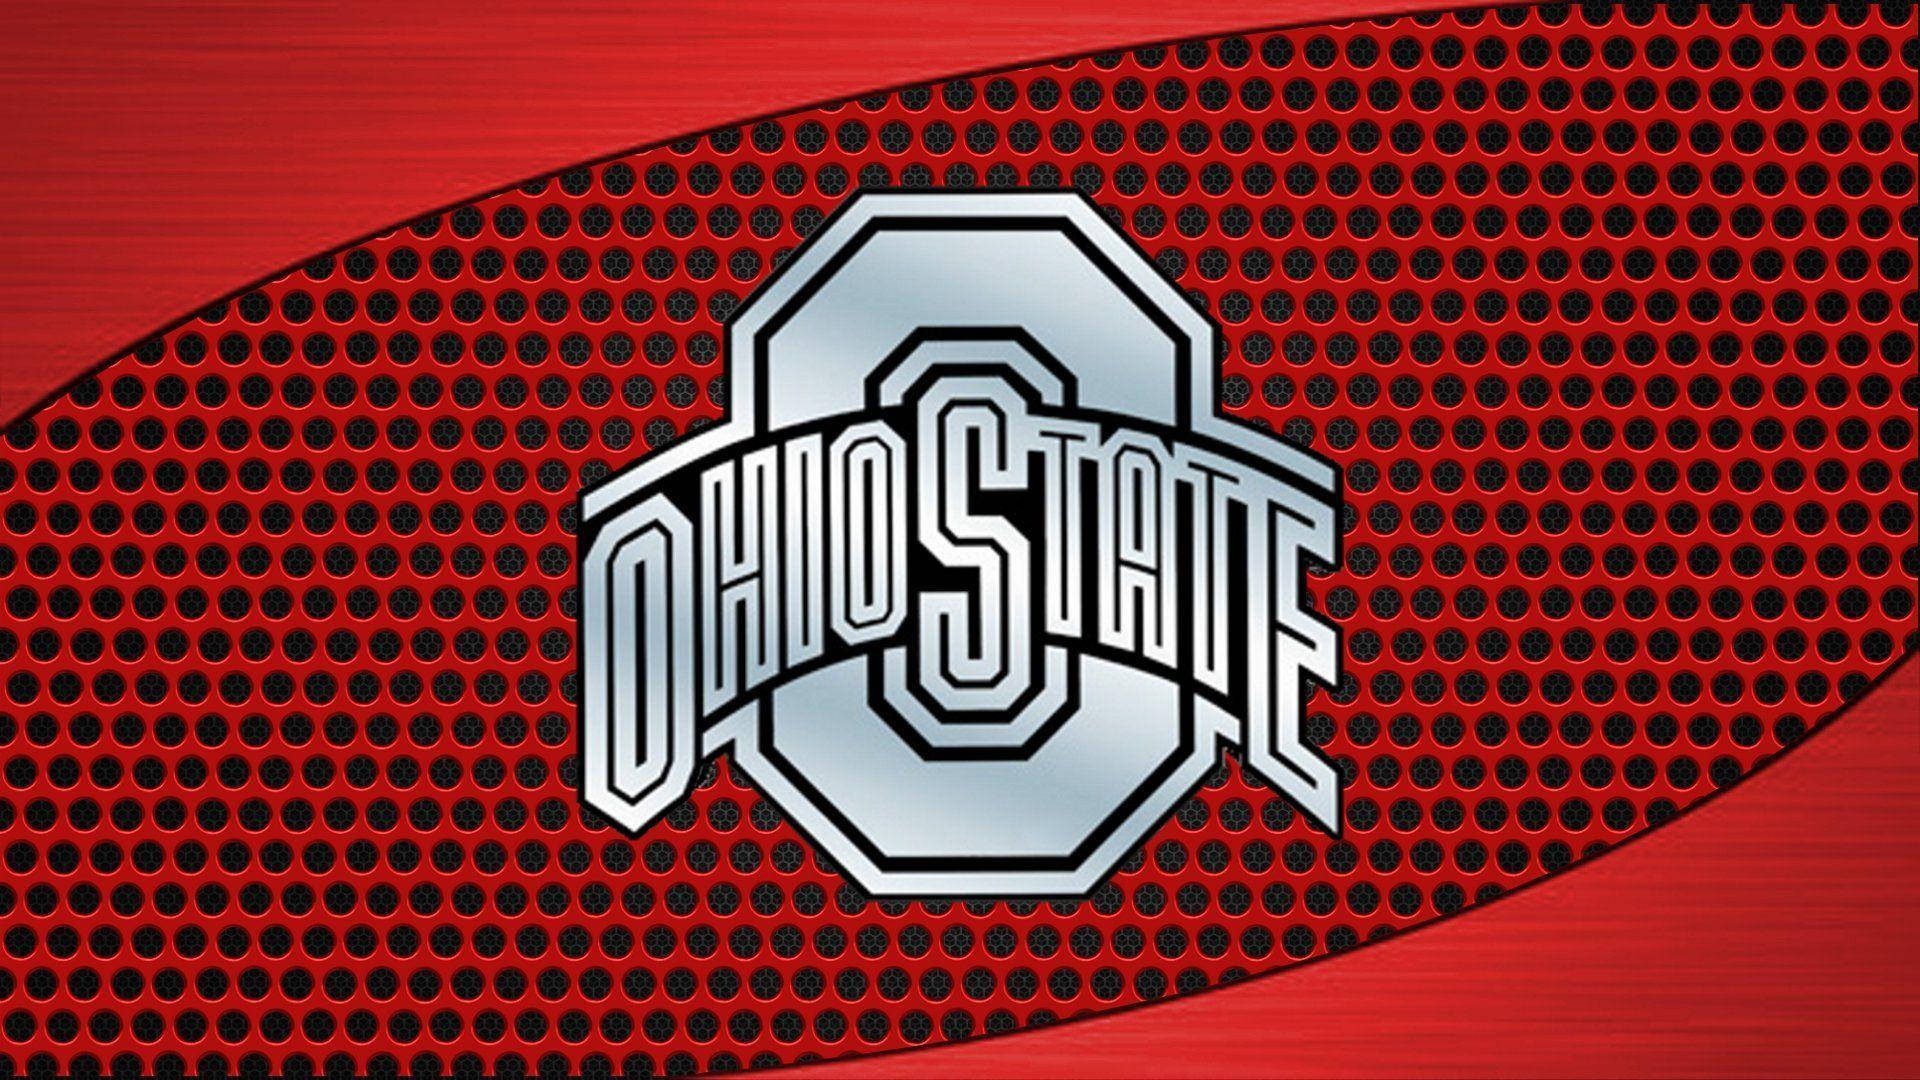 Ohio State University Spotted Pattern Background